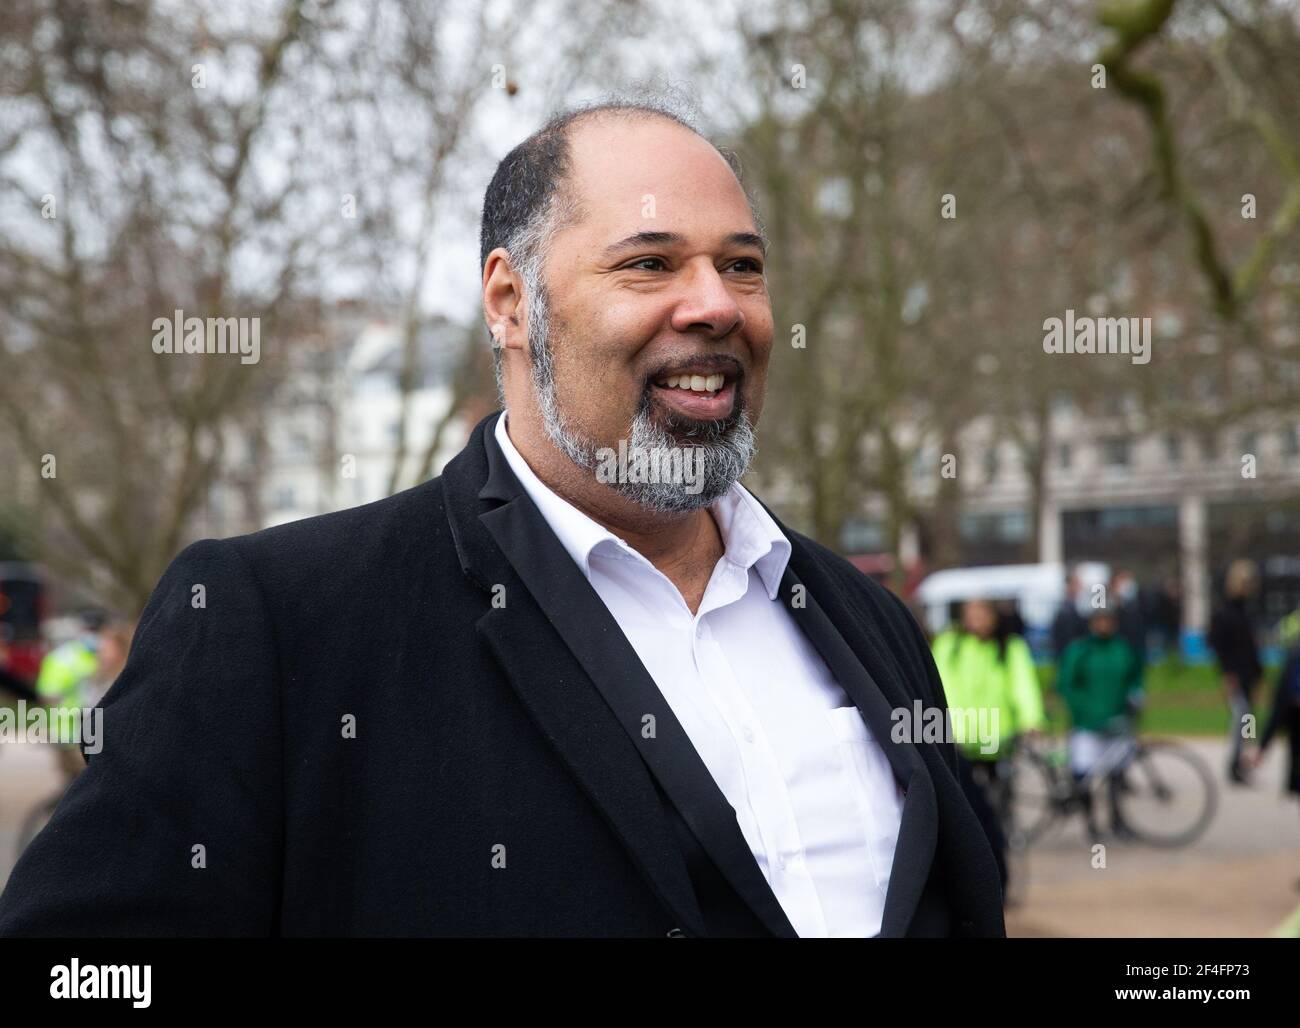 London, UK. 20th Mar, 2021. Worldwide Rally for Freedom. 'Vigil for the Voiceless', a large march by people who do not believe in the vaccine and think that people should not wear masks. They are sceptical about the Covid pandemic. Credit: Karl Black/Alamy Live News Stock Photo